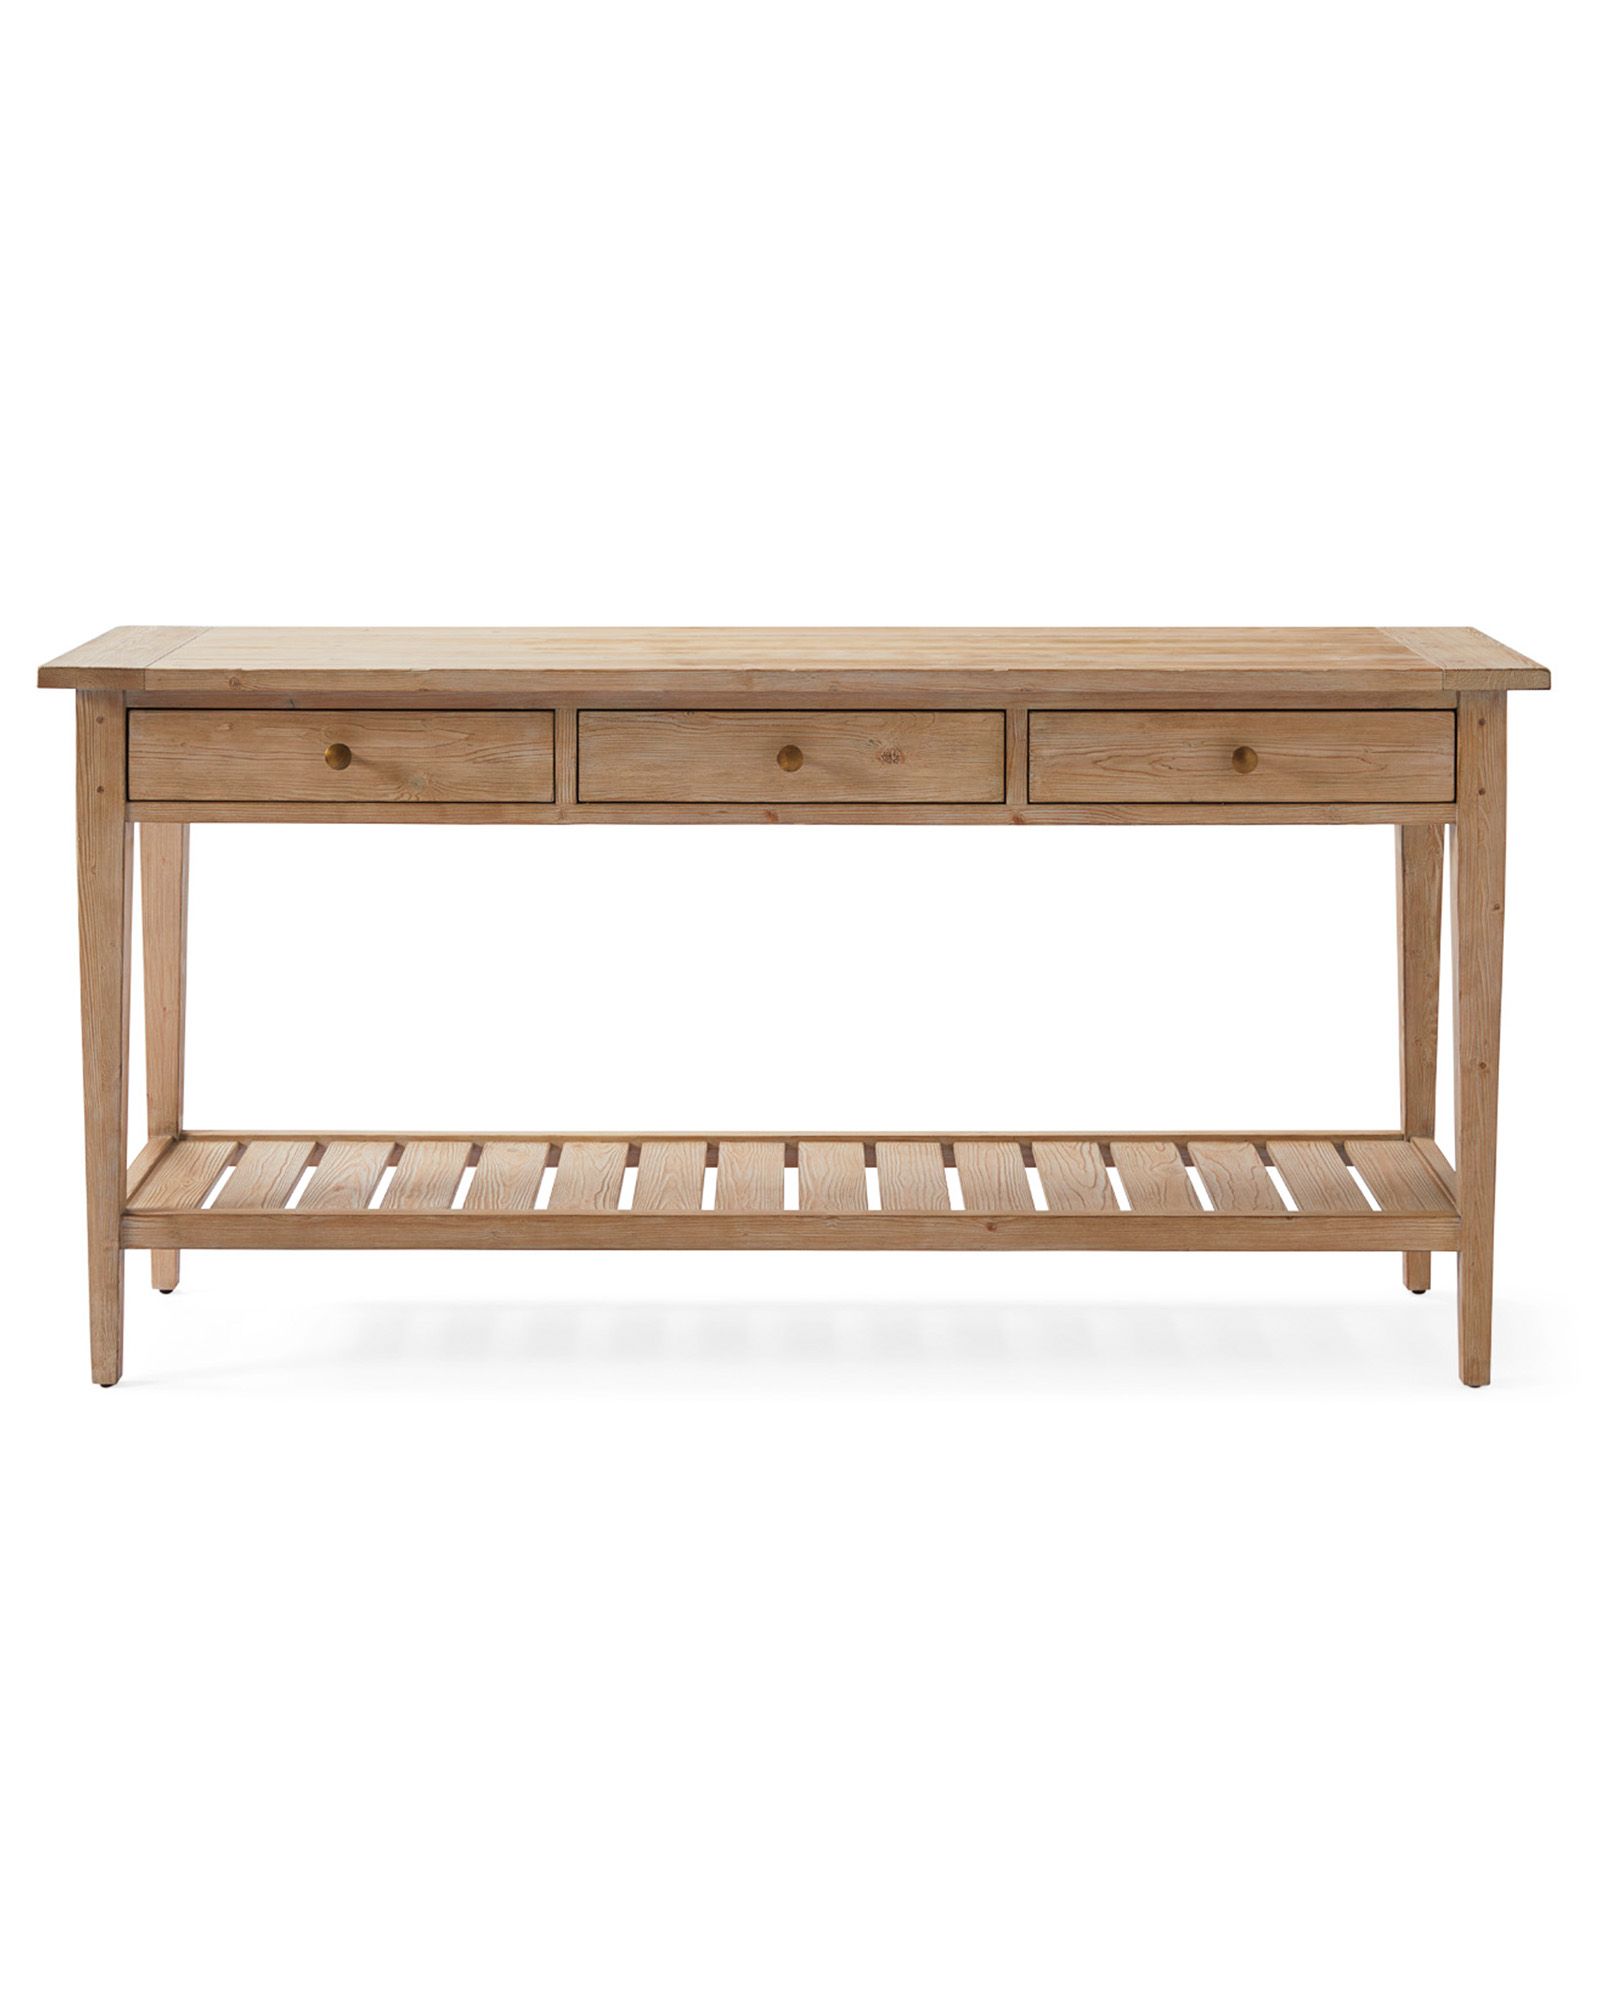 Beach House Console | Serena and Lily